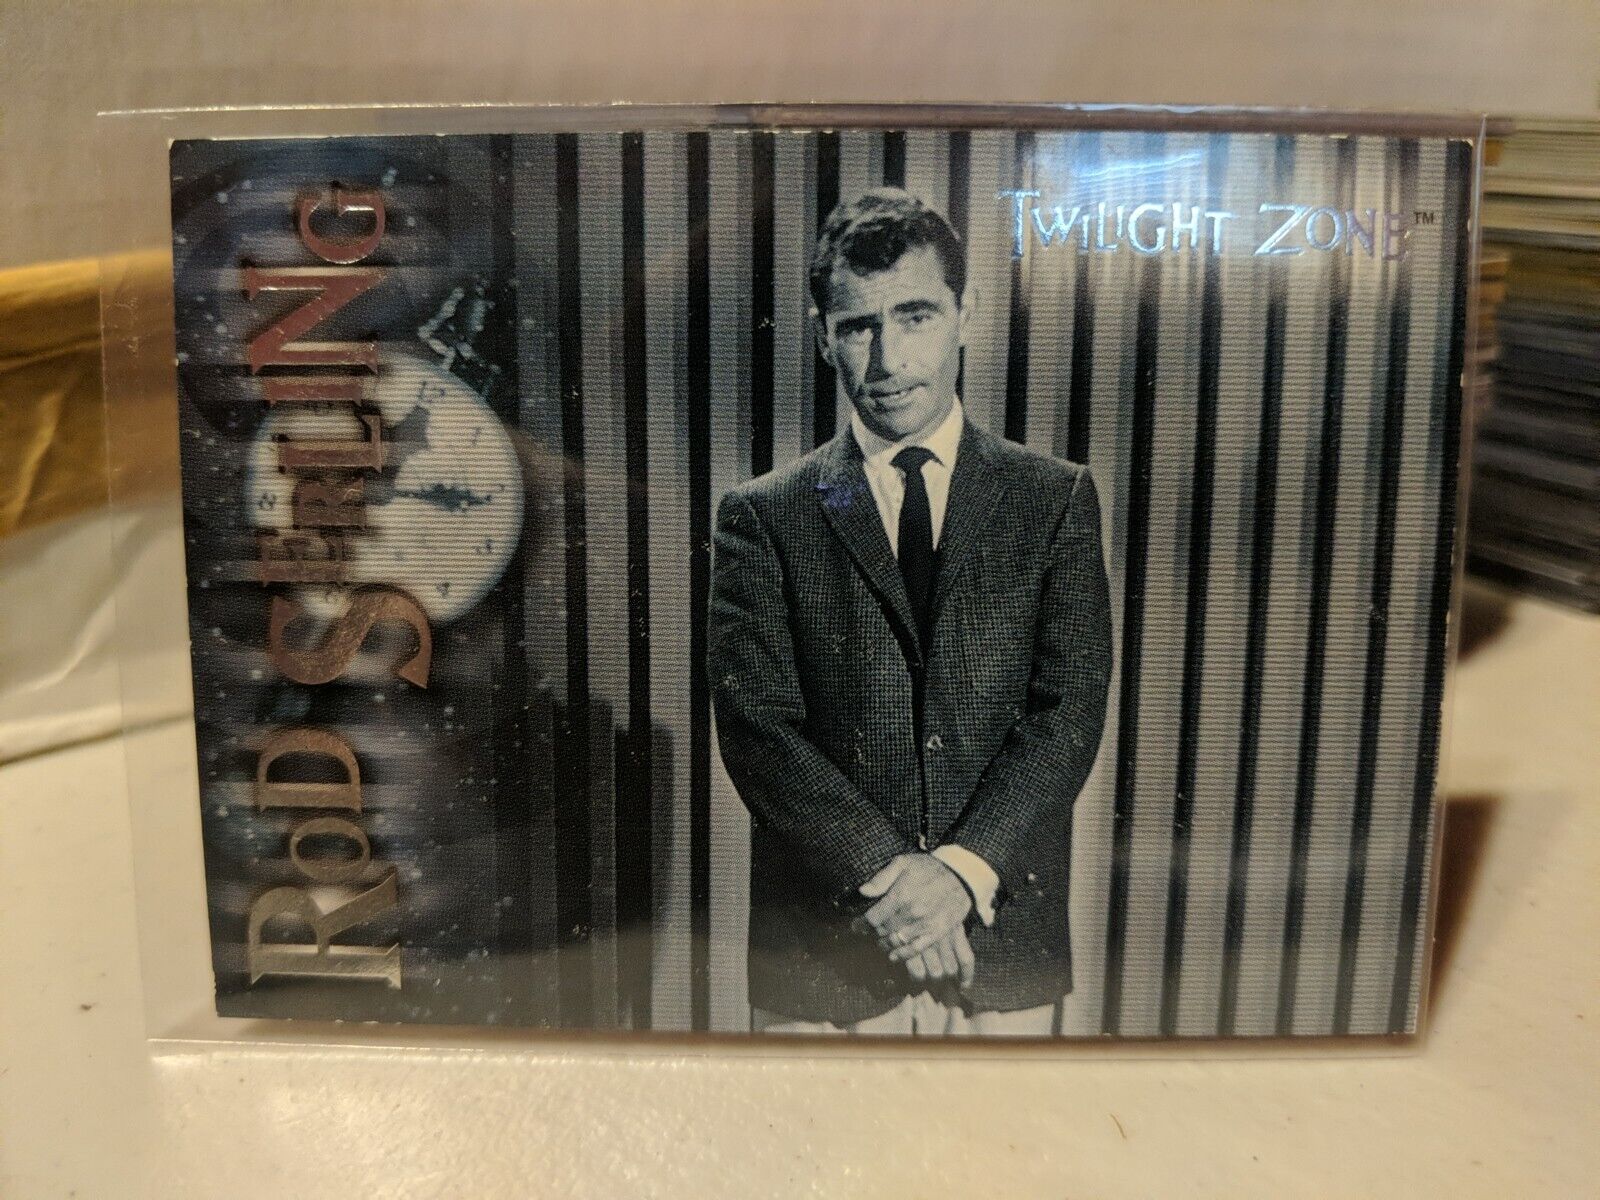 2000 Twilight Zone Series 2 The Next Dimension Rod Serling Insert Card RS1 NM 